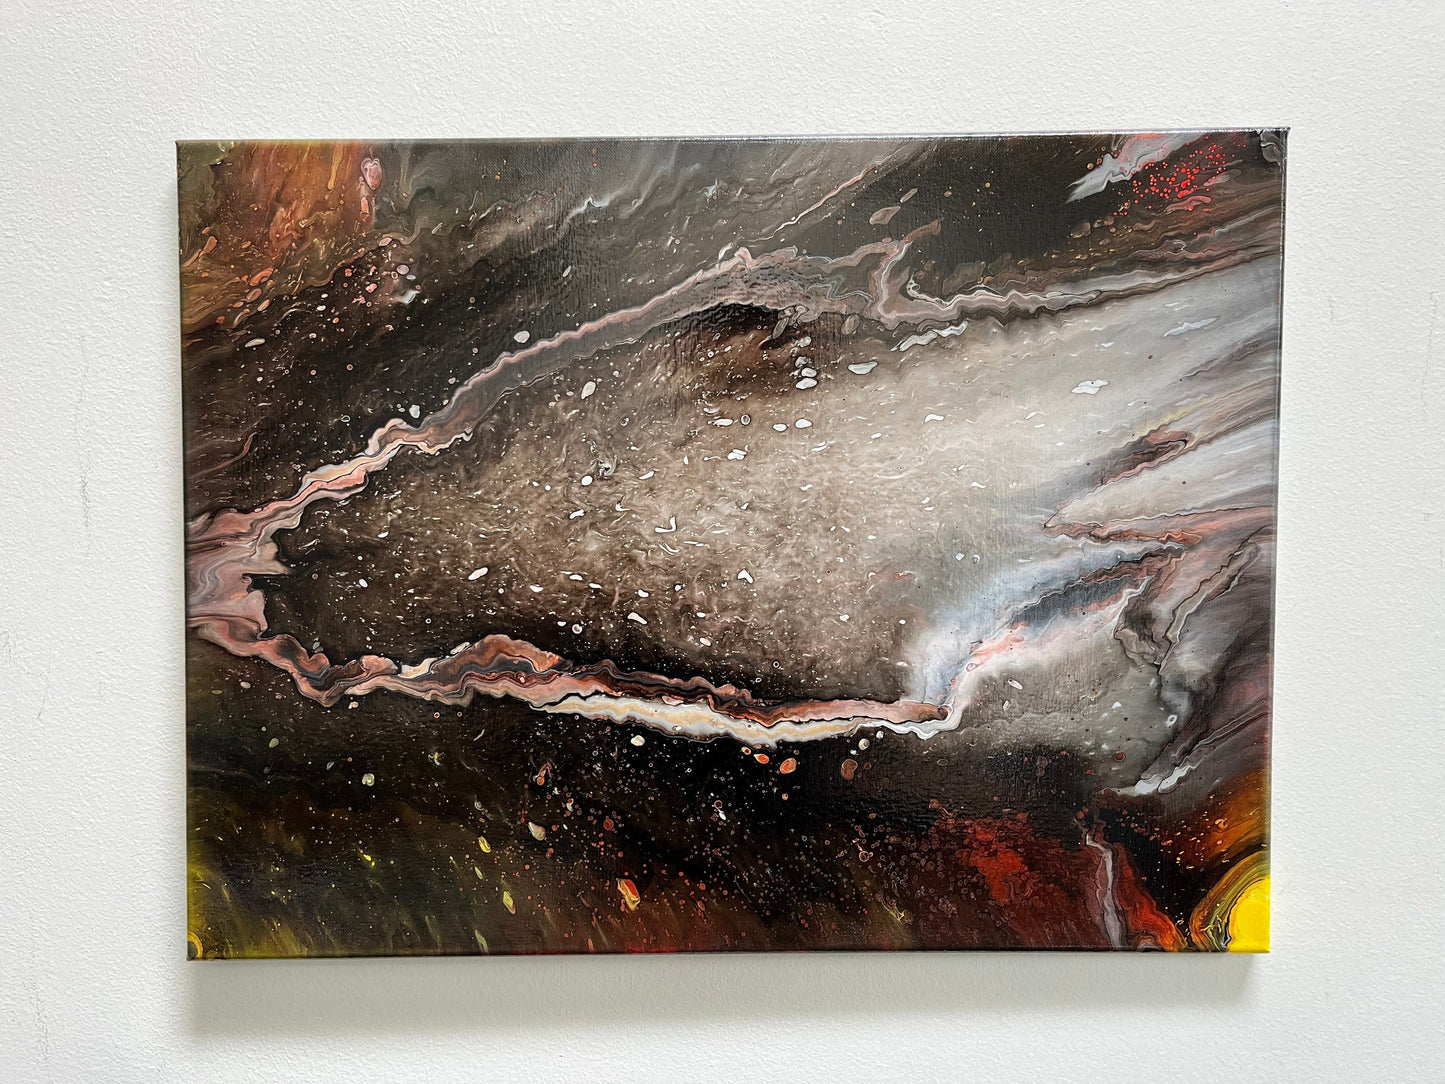 Large Cosmic Comet Pour Wall Art on Stretched Canvas Original Abstract Acrylic Painting Home Décor 24x18 by Sydney Smith